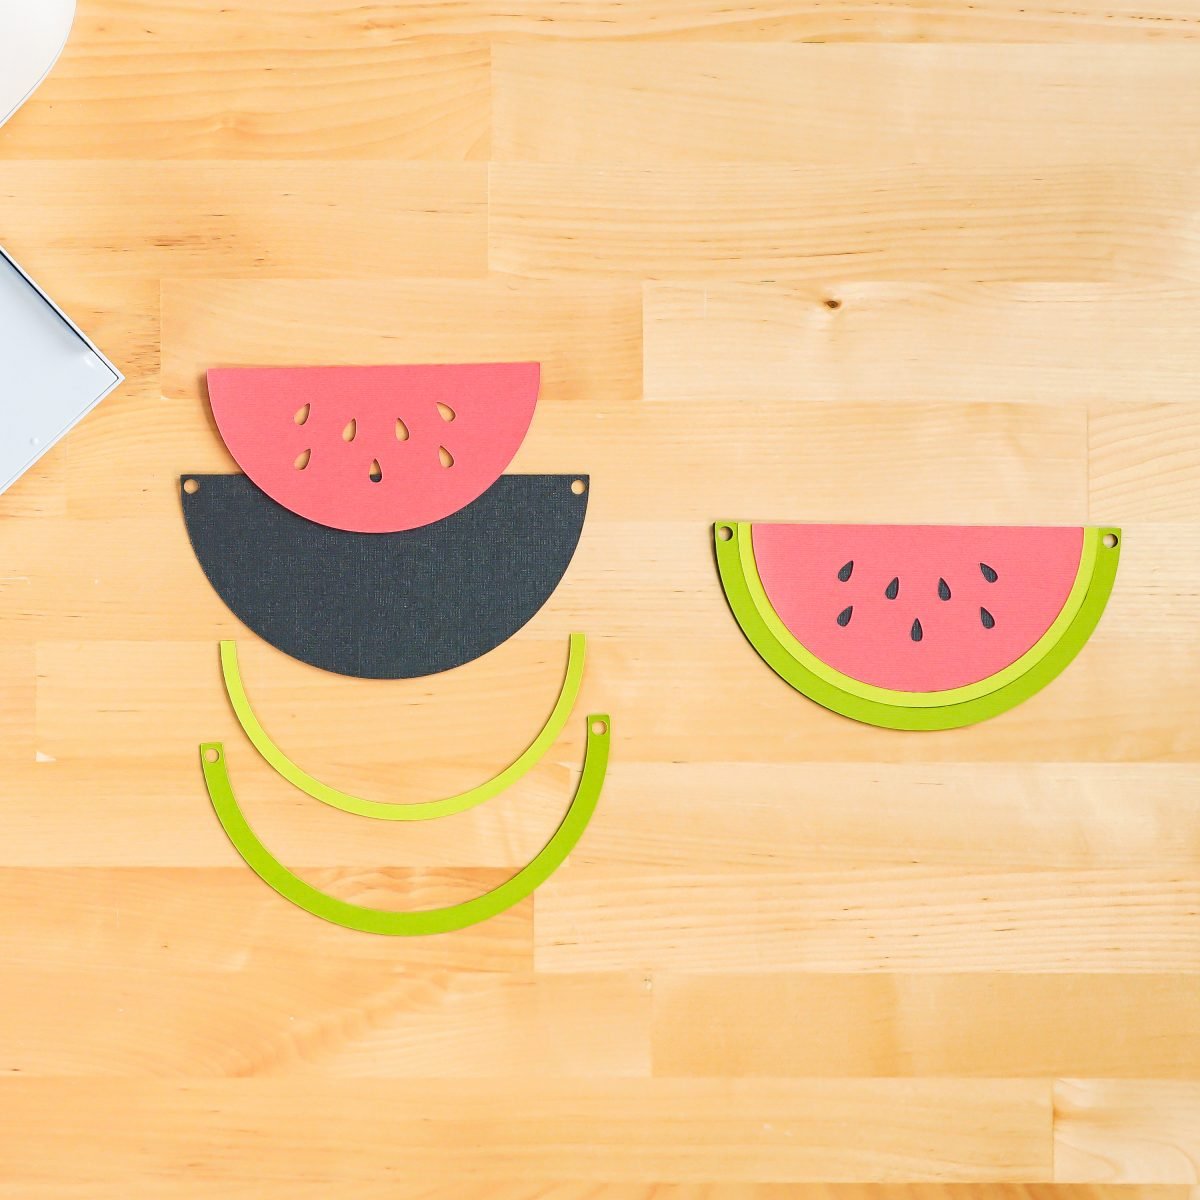 How to assemble the watermelon